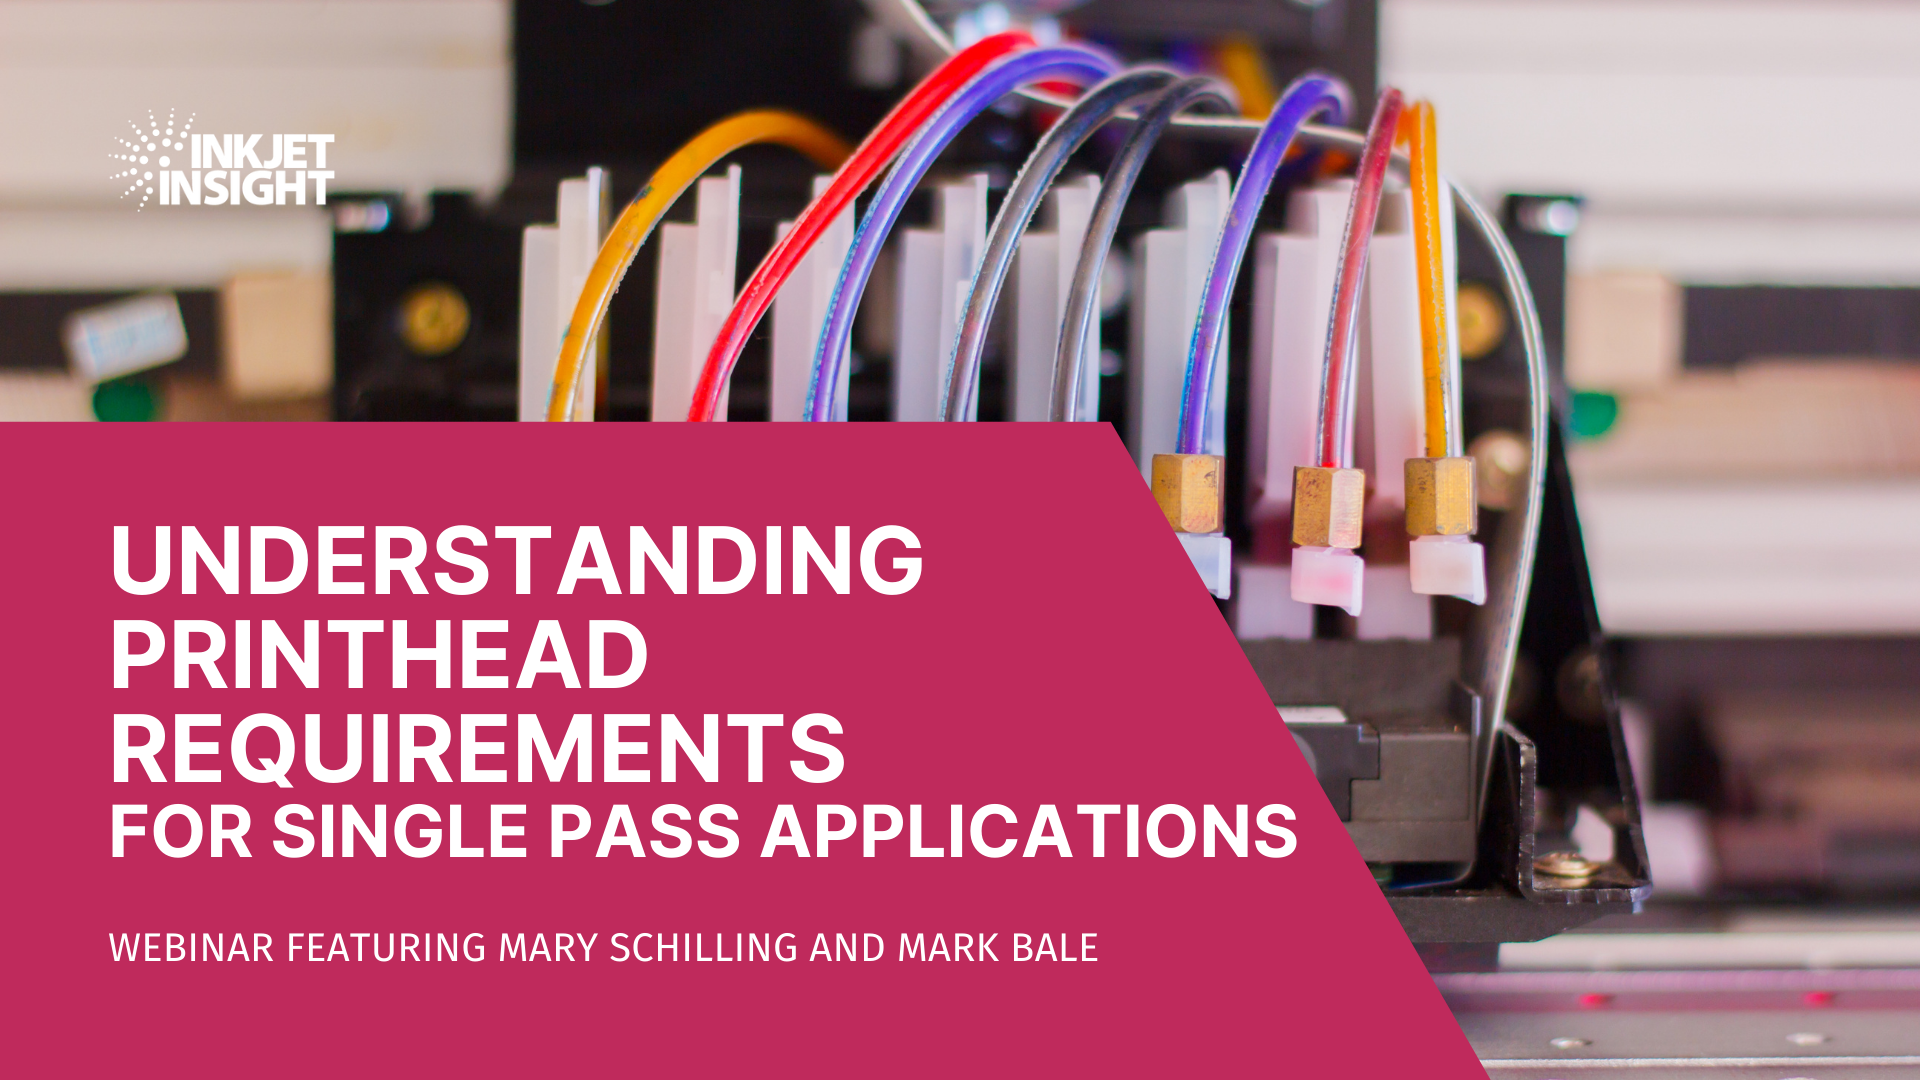 Featured image for “Understanding Printhead Requirements for Single Pass Applications”